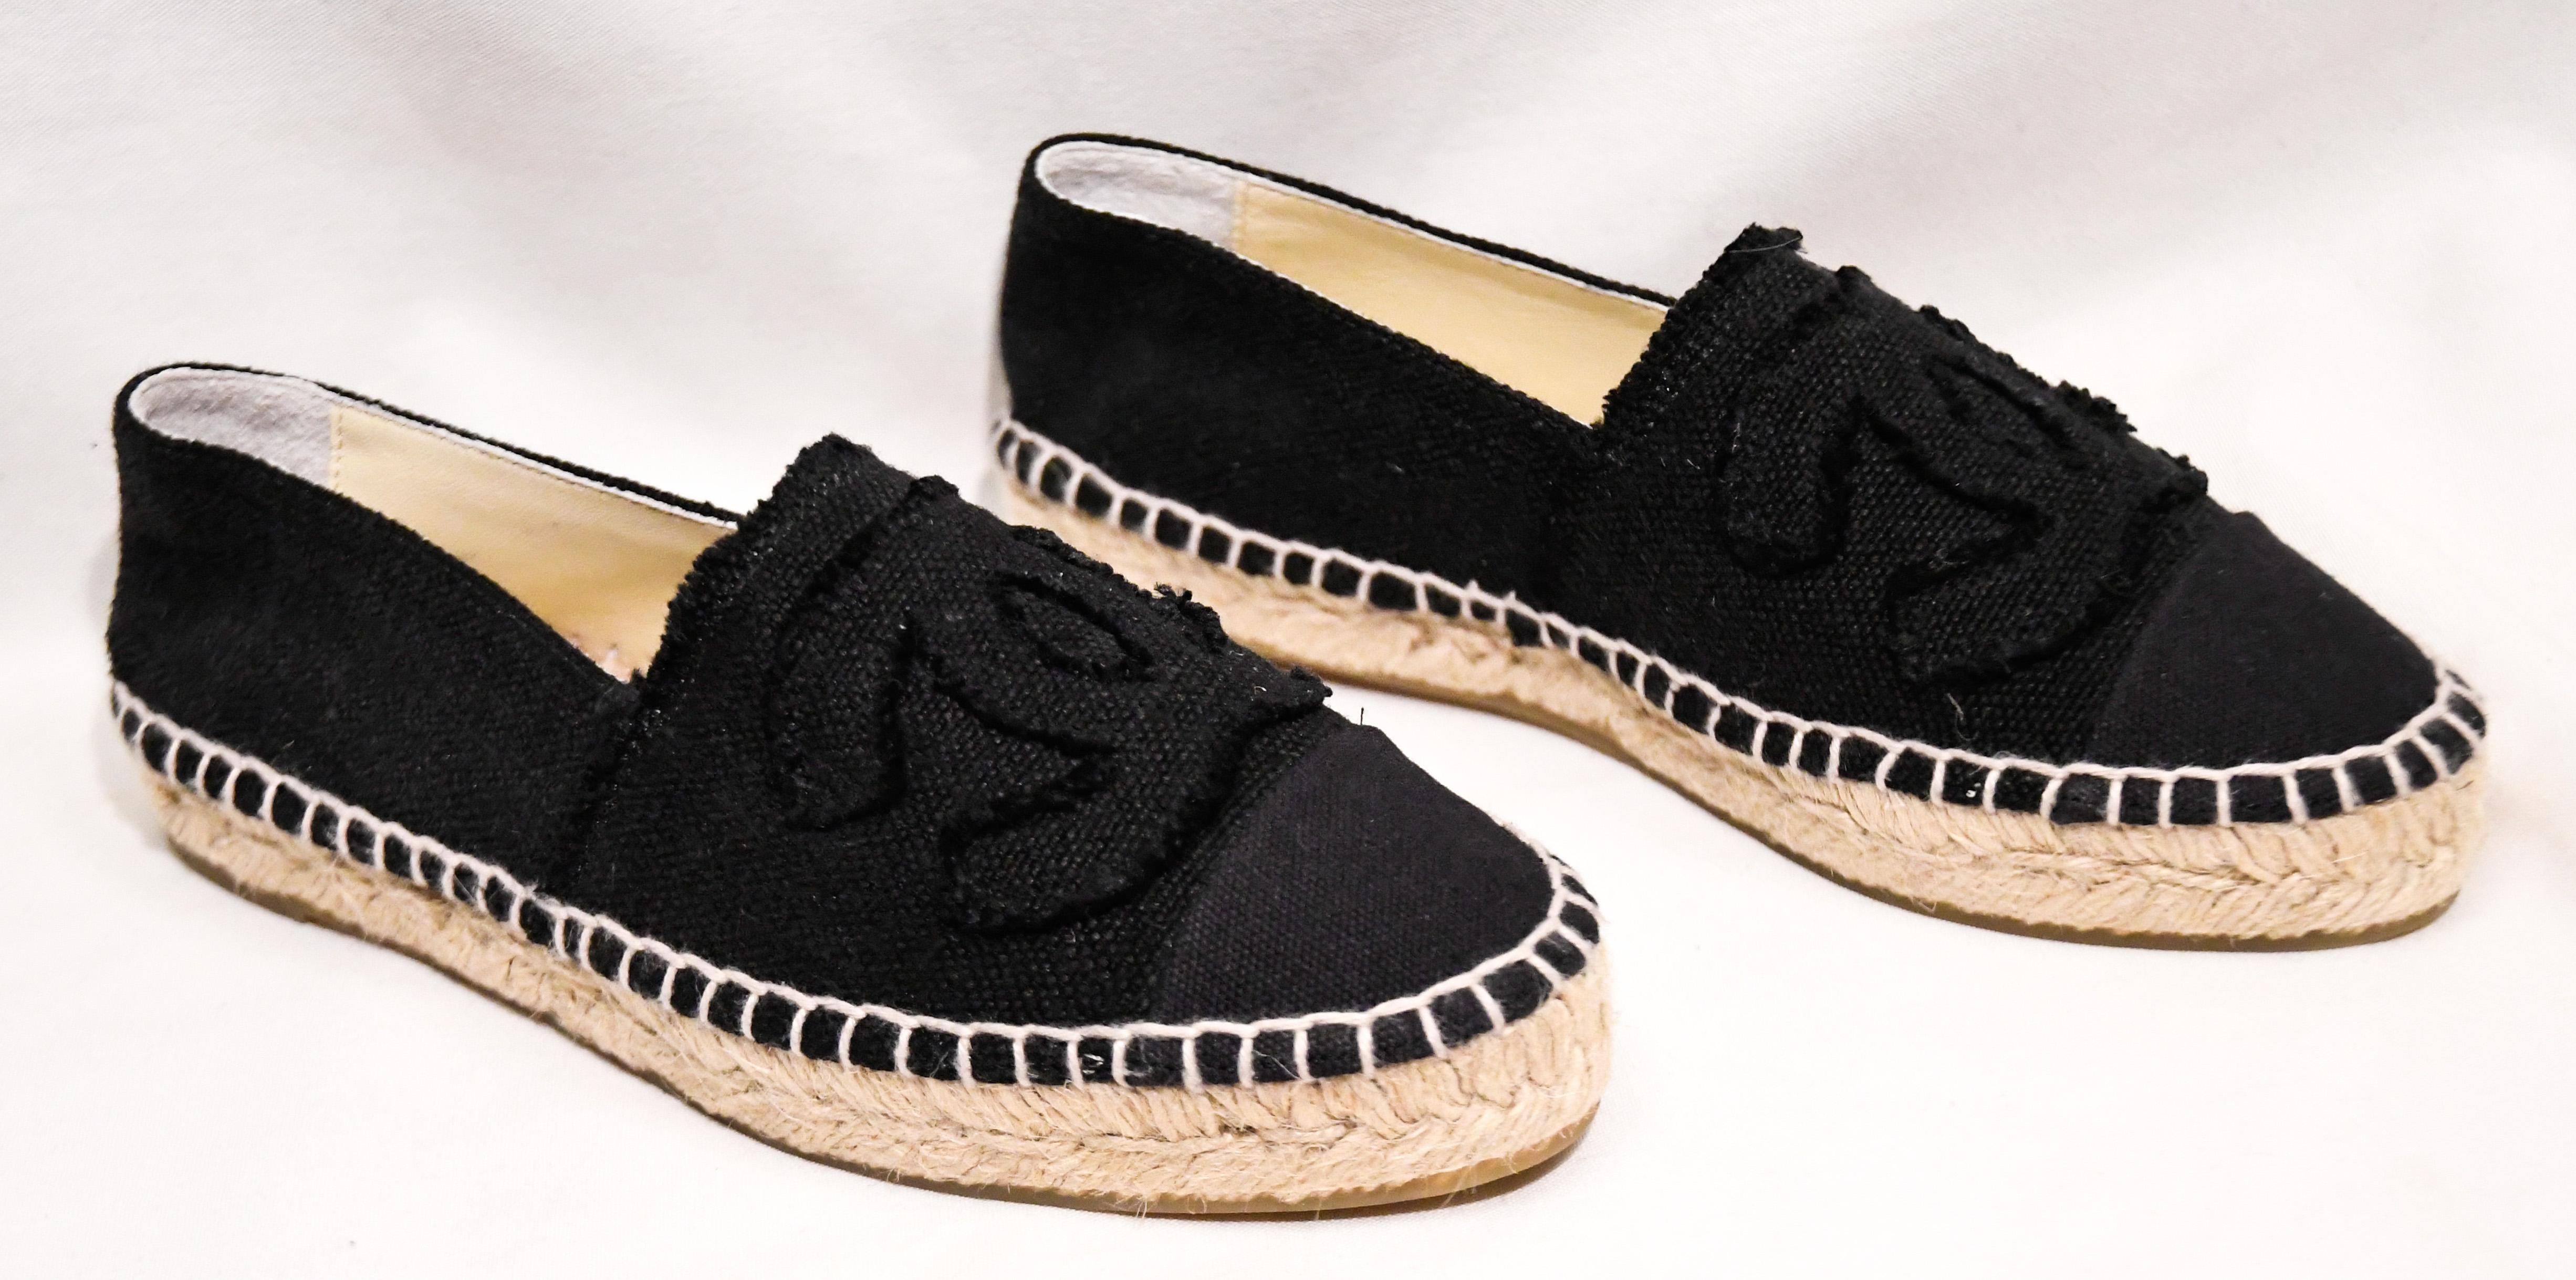 Chanel black linen canvas espadrille flats can enhance any style. These highly sought after espadrilles from Spring 2014, are a must have for any trendy fashionista! These flats include the signature woven rope Espadrille style and a large CC